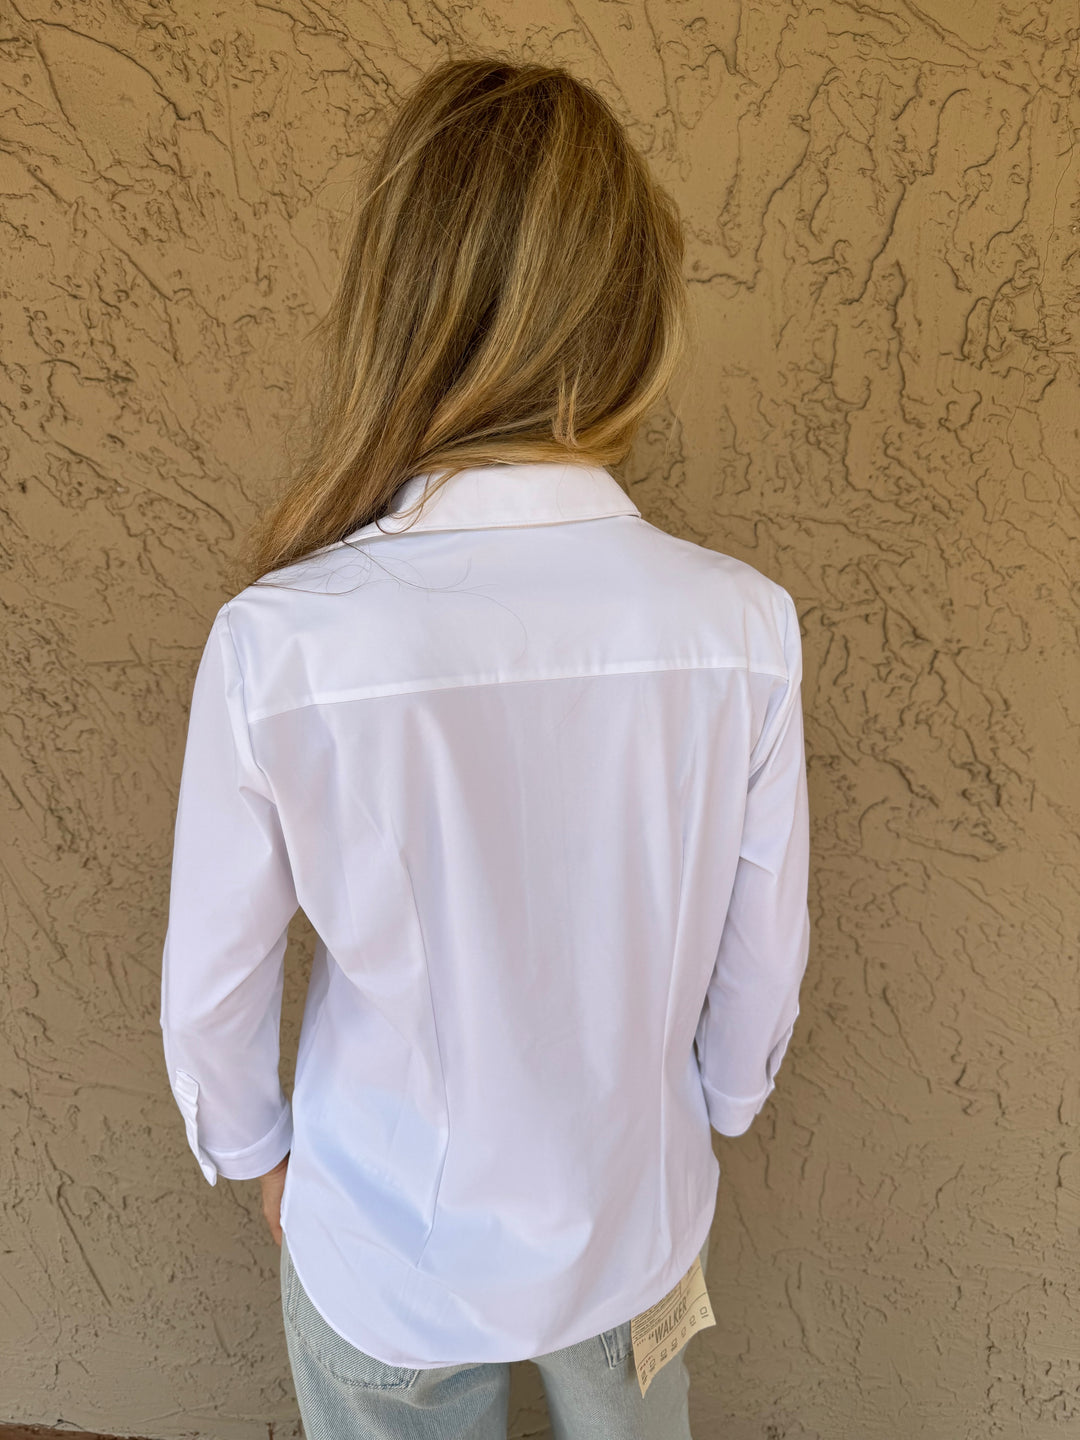 Ameliora Diane 3/4 Sleeve Shirt in White - Back View